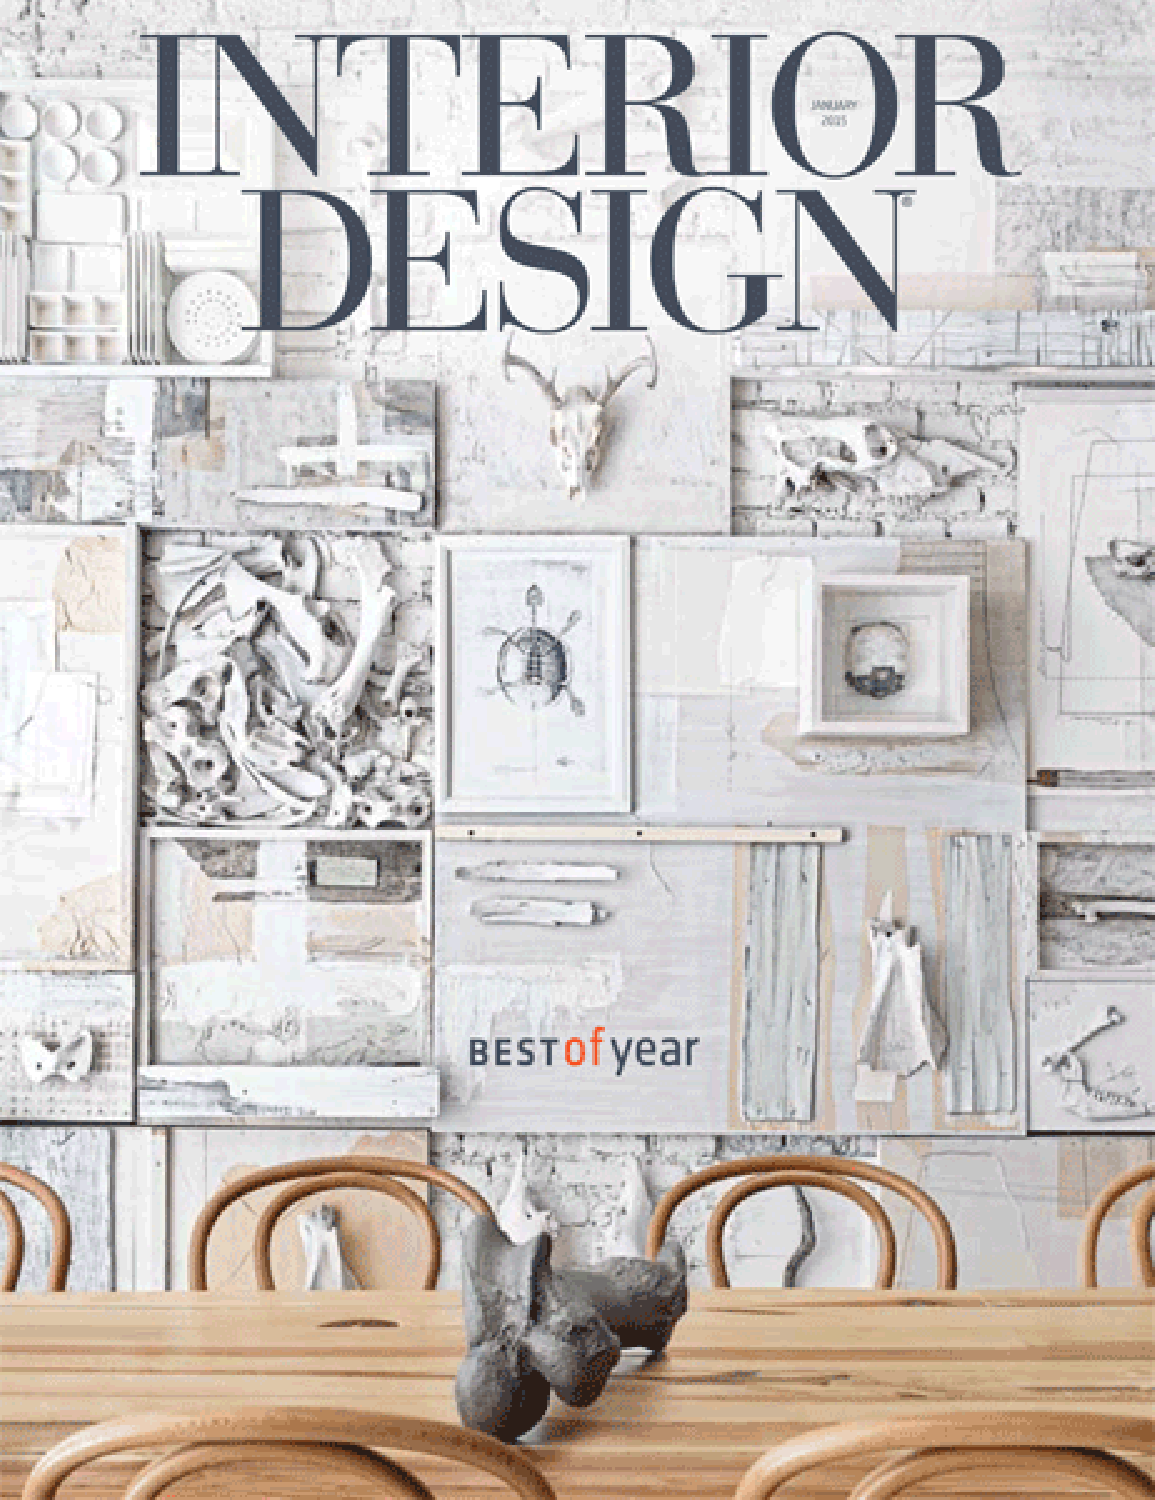 40954-Interior-Design-January-2015-Cover.png